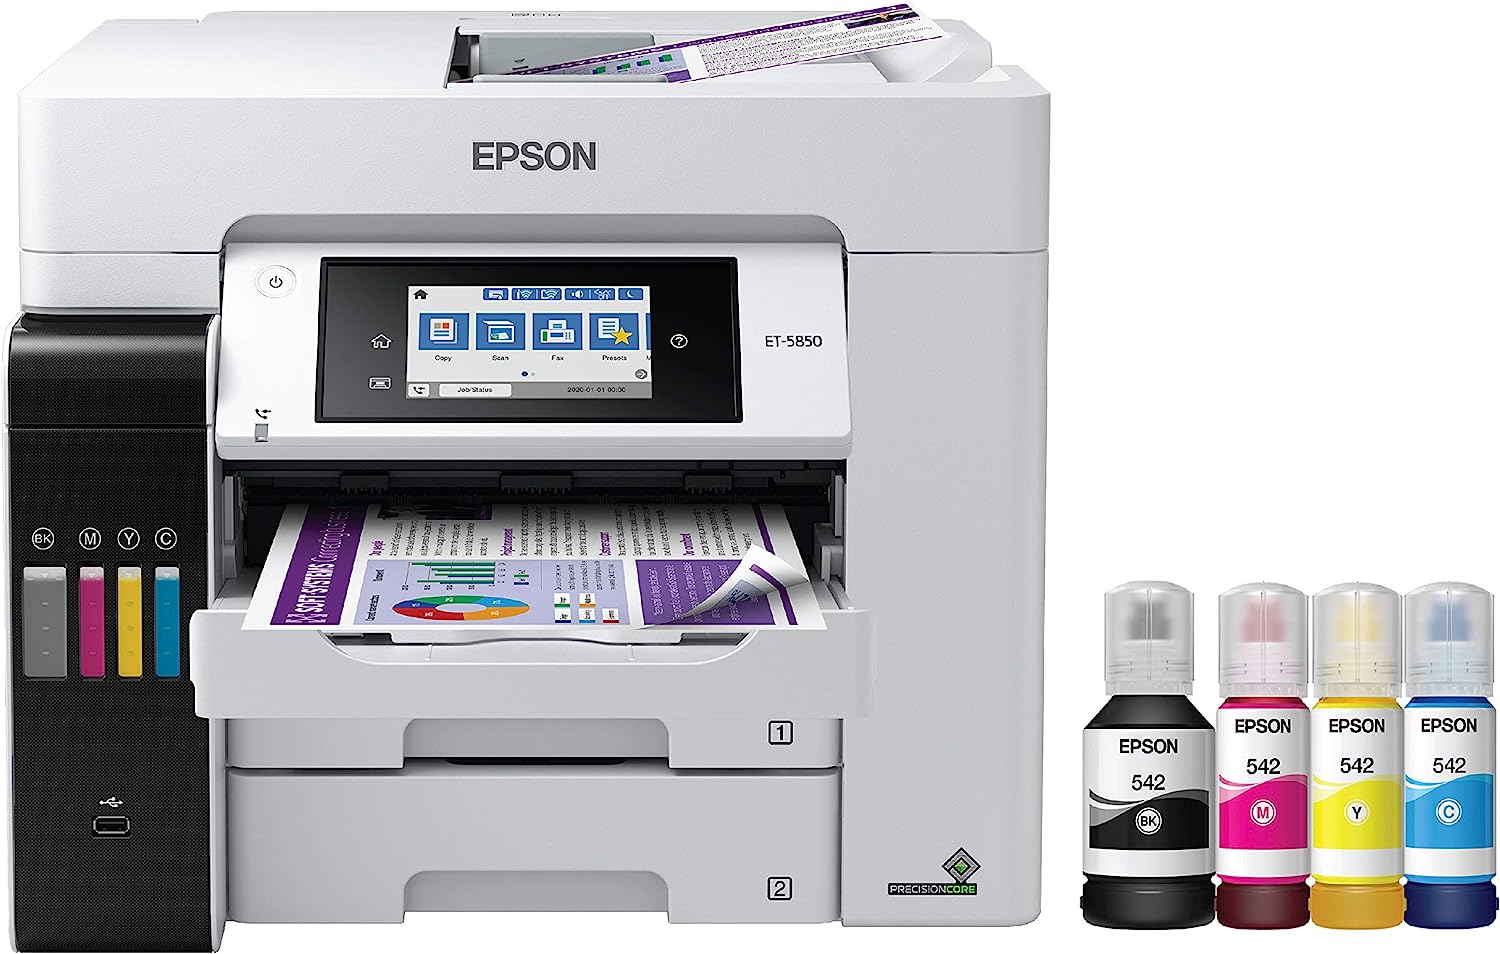 Epson EcoTank Pro ET-5850 Wireless Color All-in-One [...]